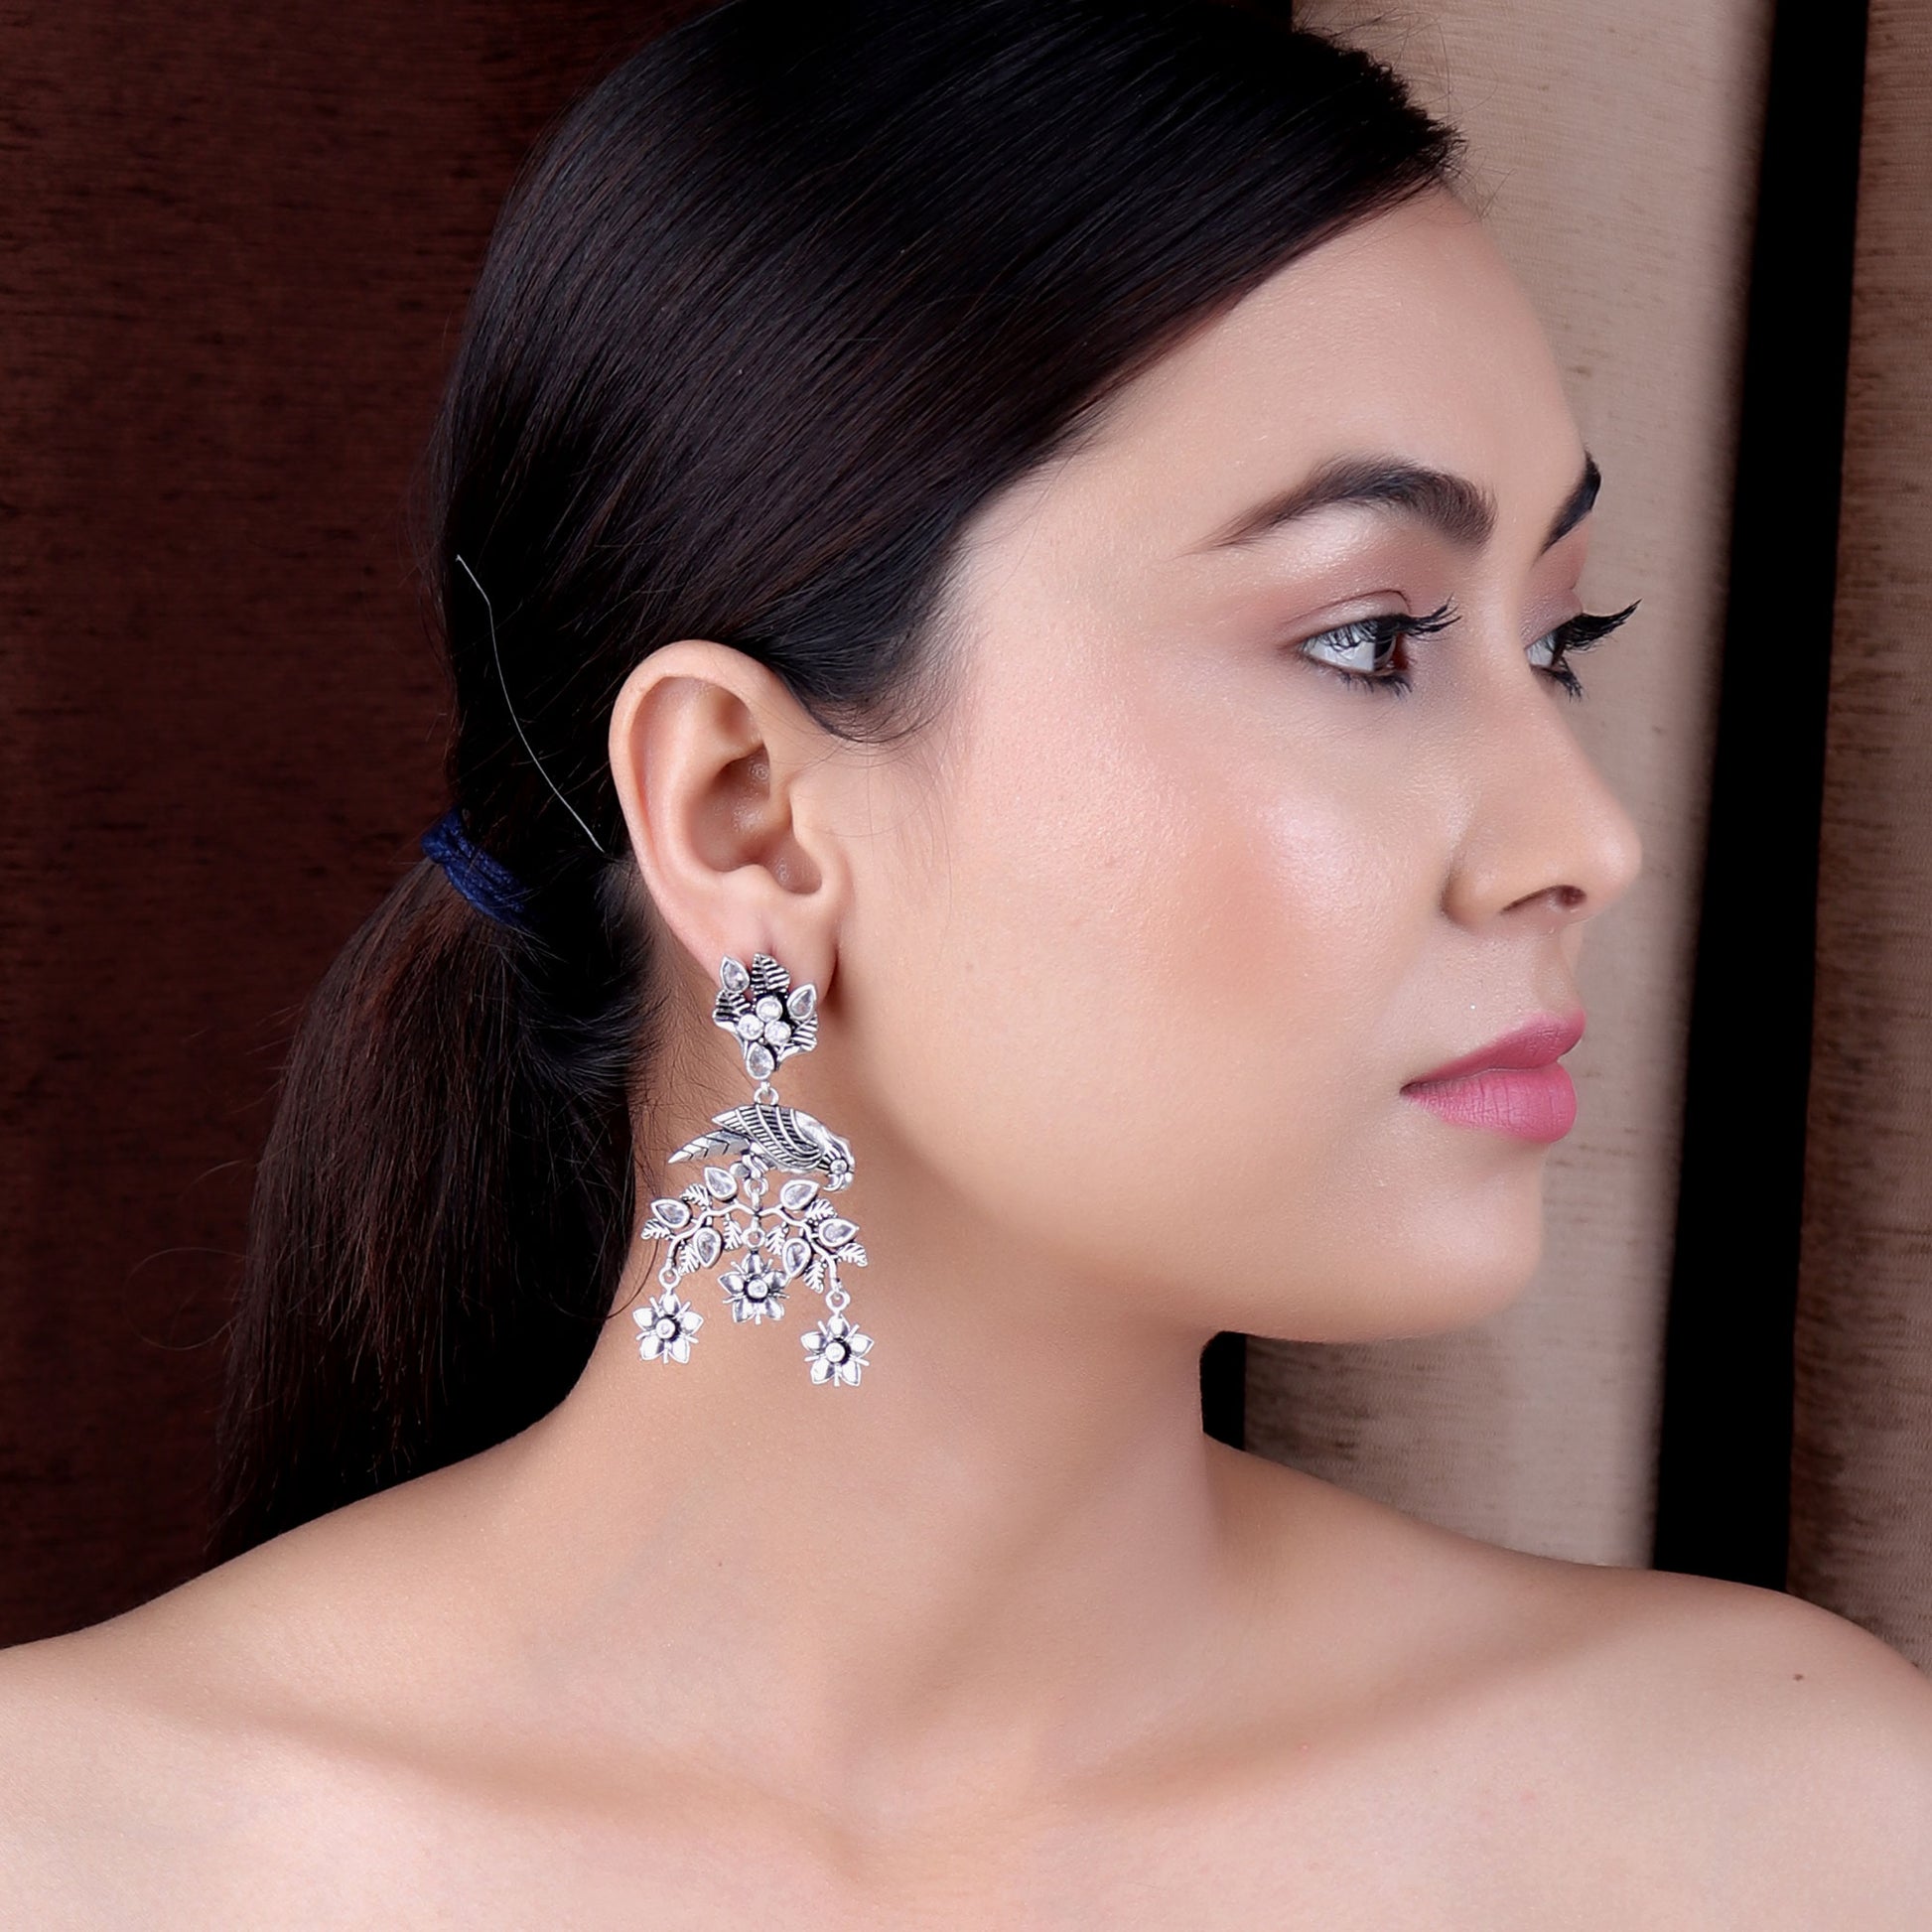 Earrings,The Glistening Parrot Earrings with White Stones - Cippele Multi Store